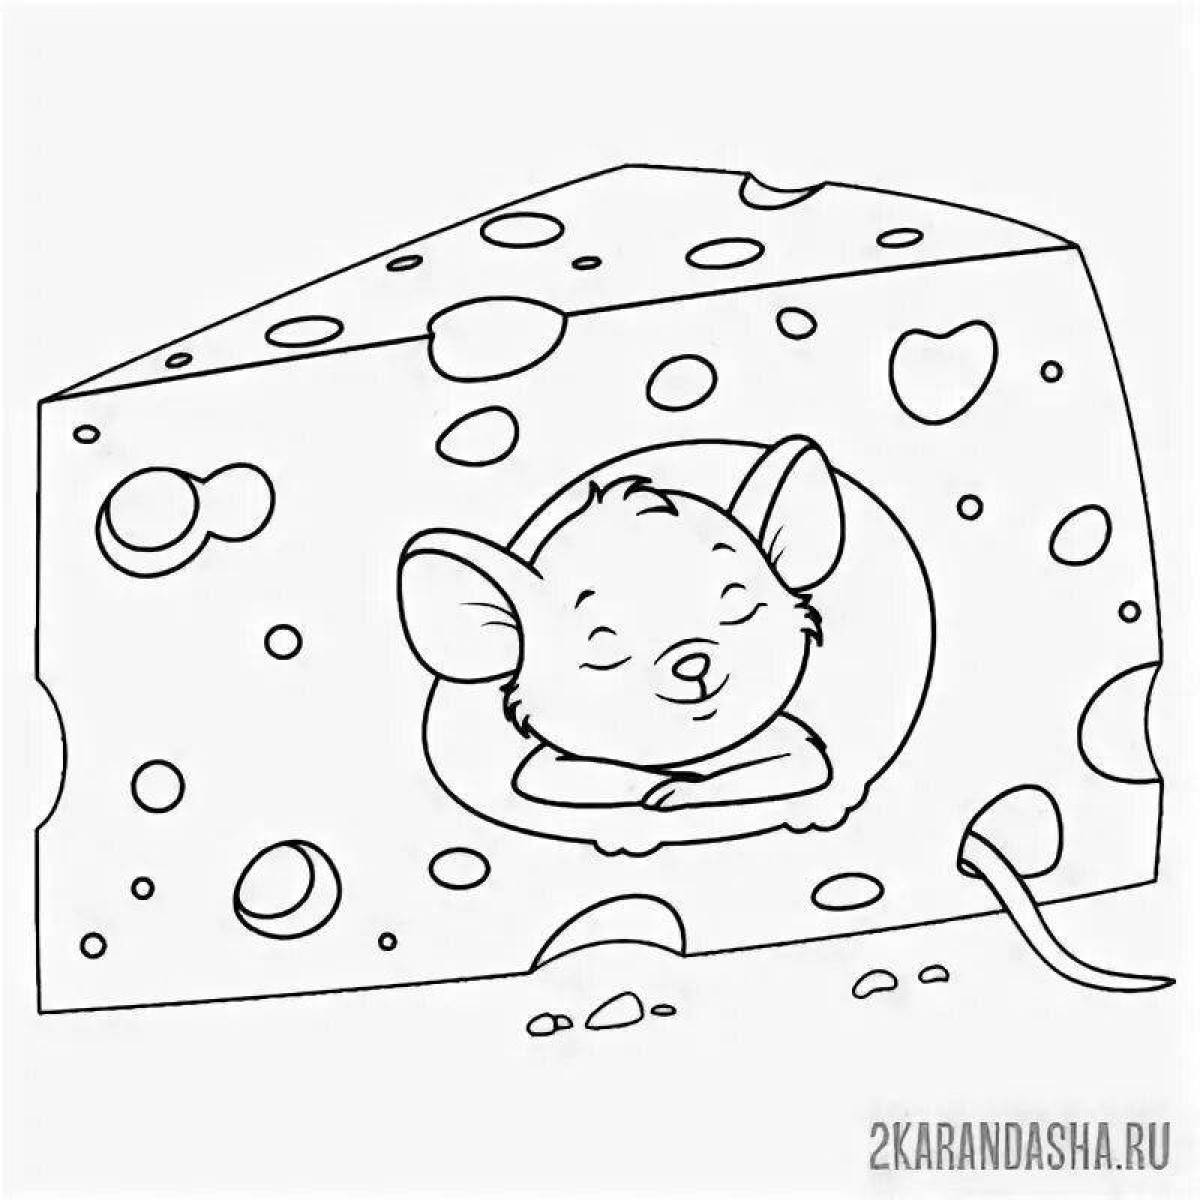 Coloring page adorable mouse with cheese